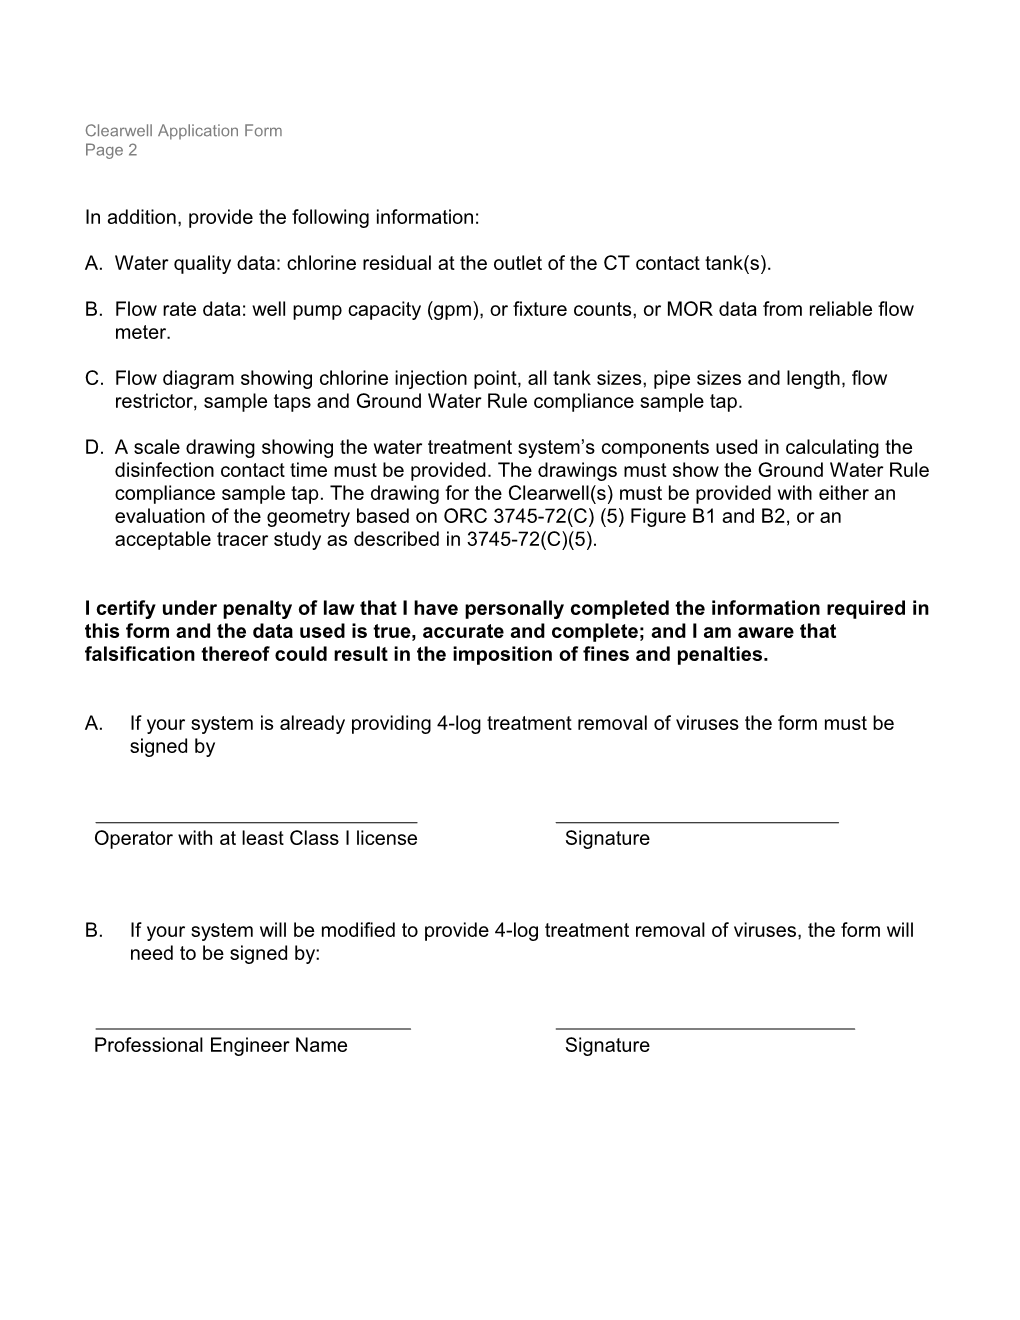 Ohio Application Form for Ground Water Rule 4-Log Treatment of Viruses